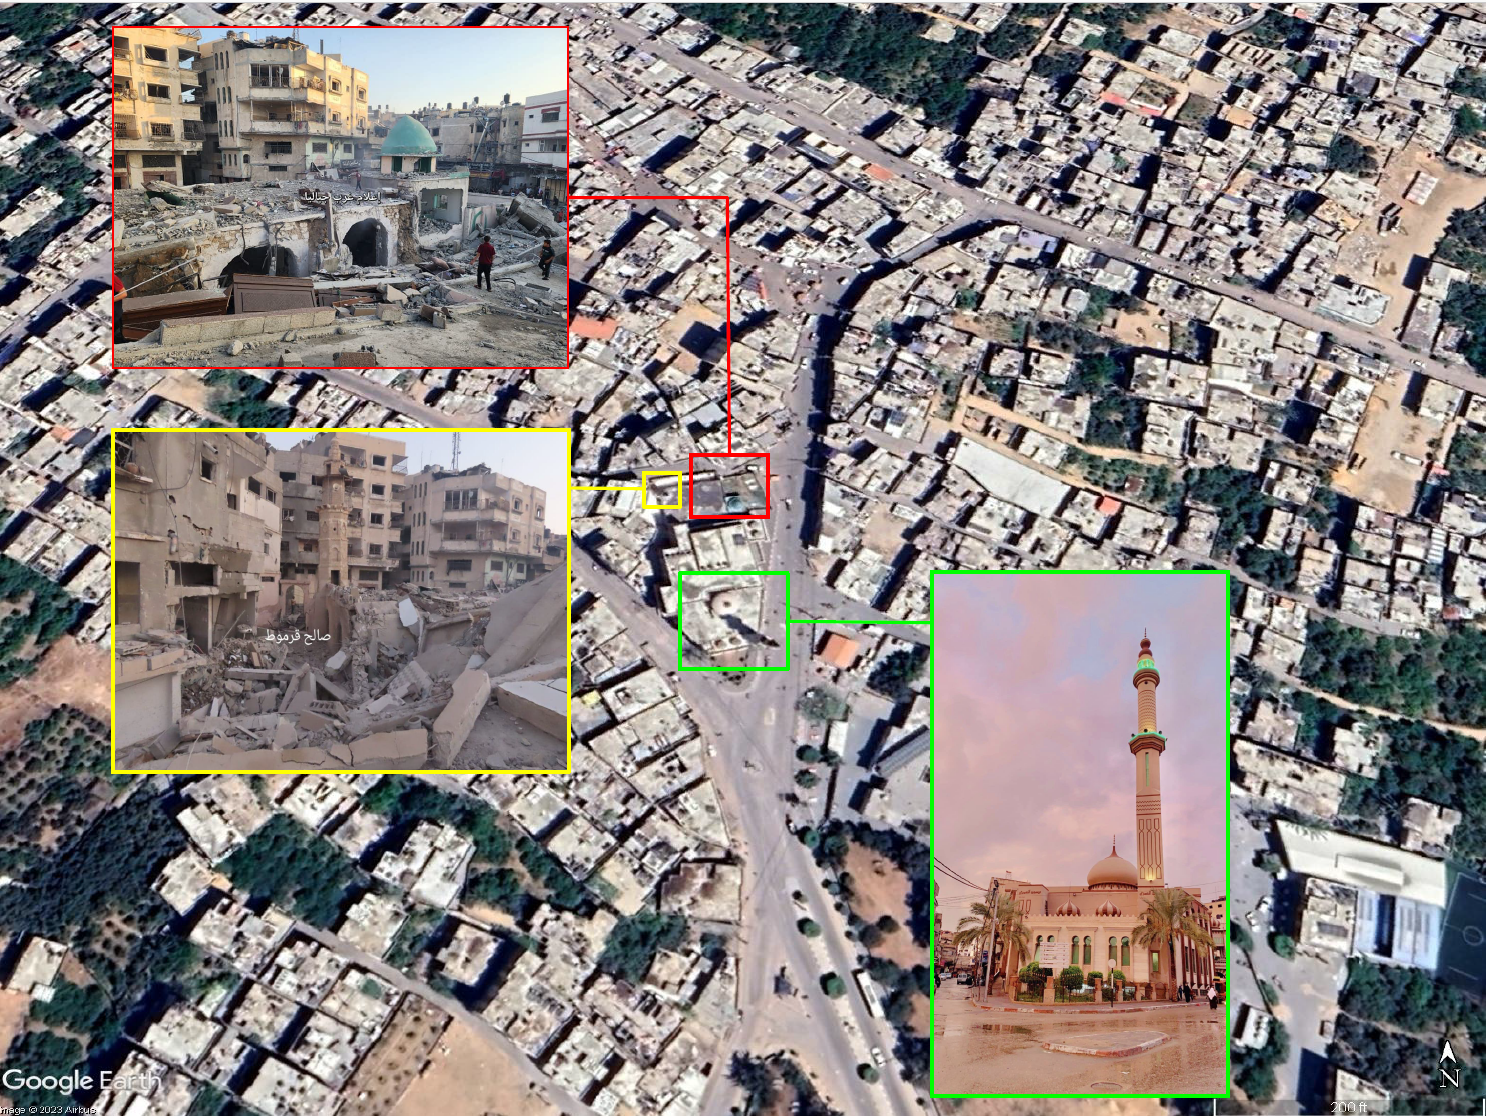 A composite map showing the location of the Al-Omari mosque in Jabalia, Gaza, containing satellite imagery, an image of the mosque before the October 20 attack, and two images of the destruction after.